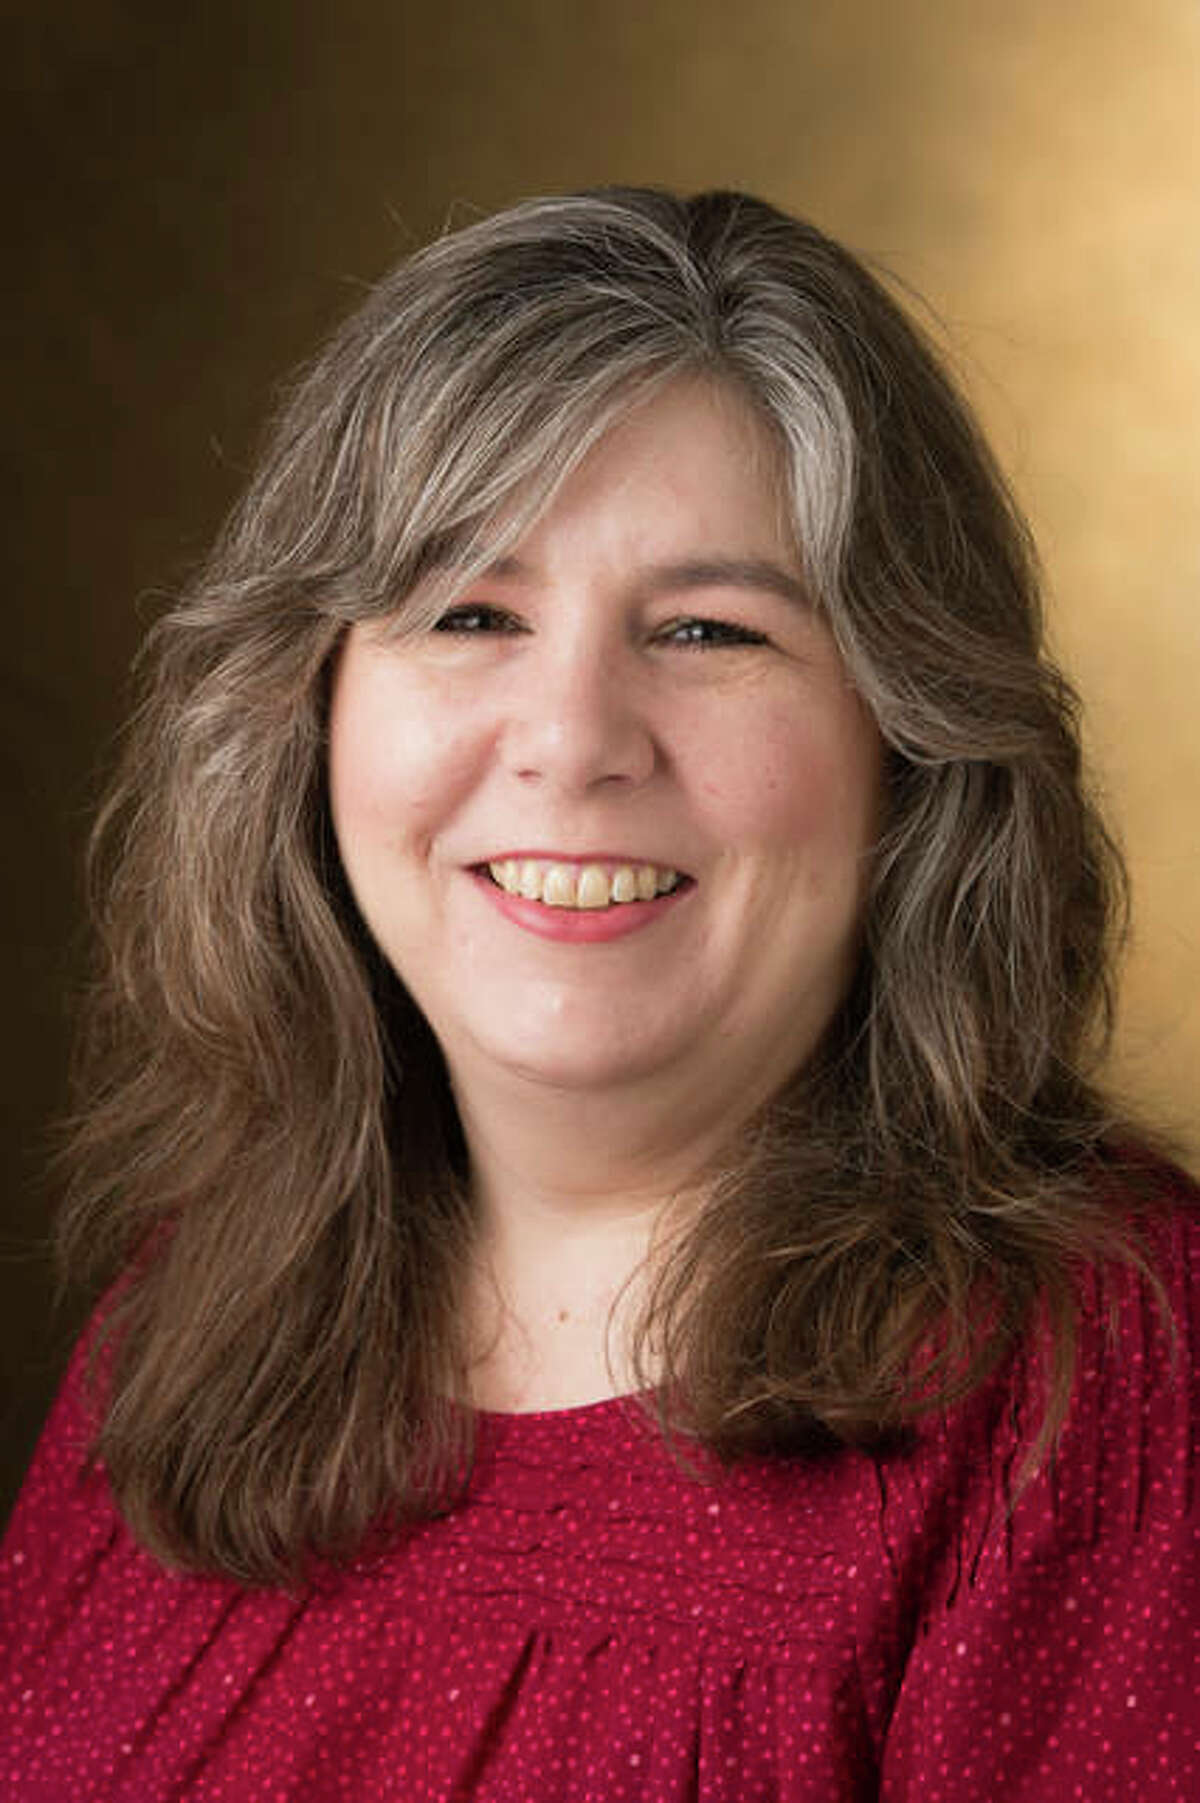 SIUE’s new Sustainability Action Group (SAG) steering committee, chaired by Connie Frey Spurlock, PhD, associate professor in the Department of Sociology.